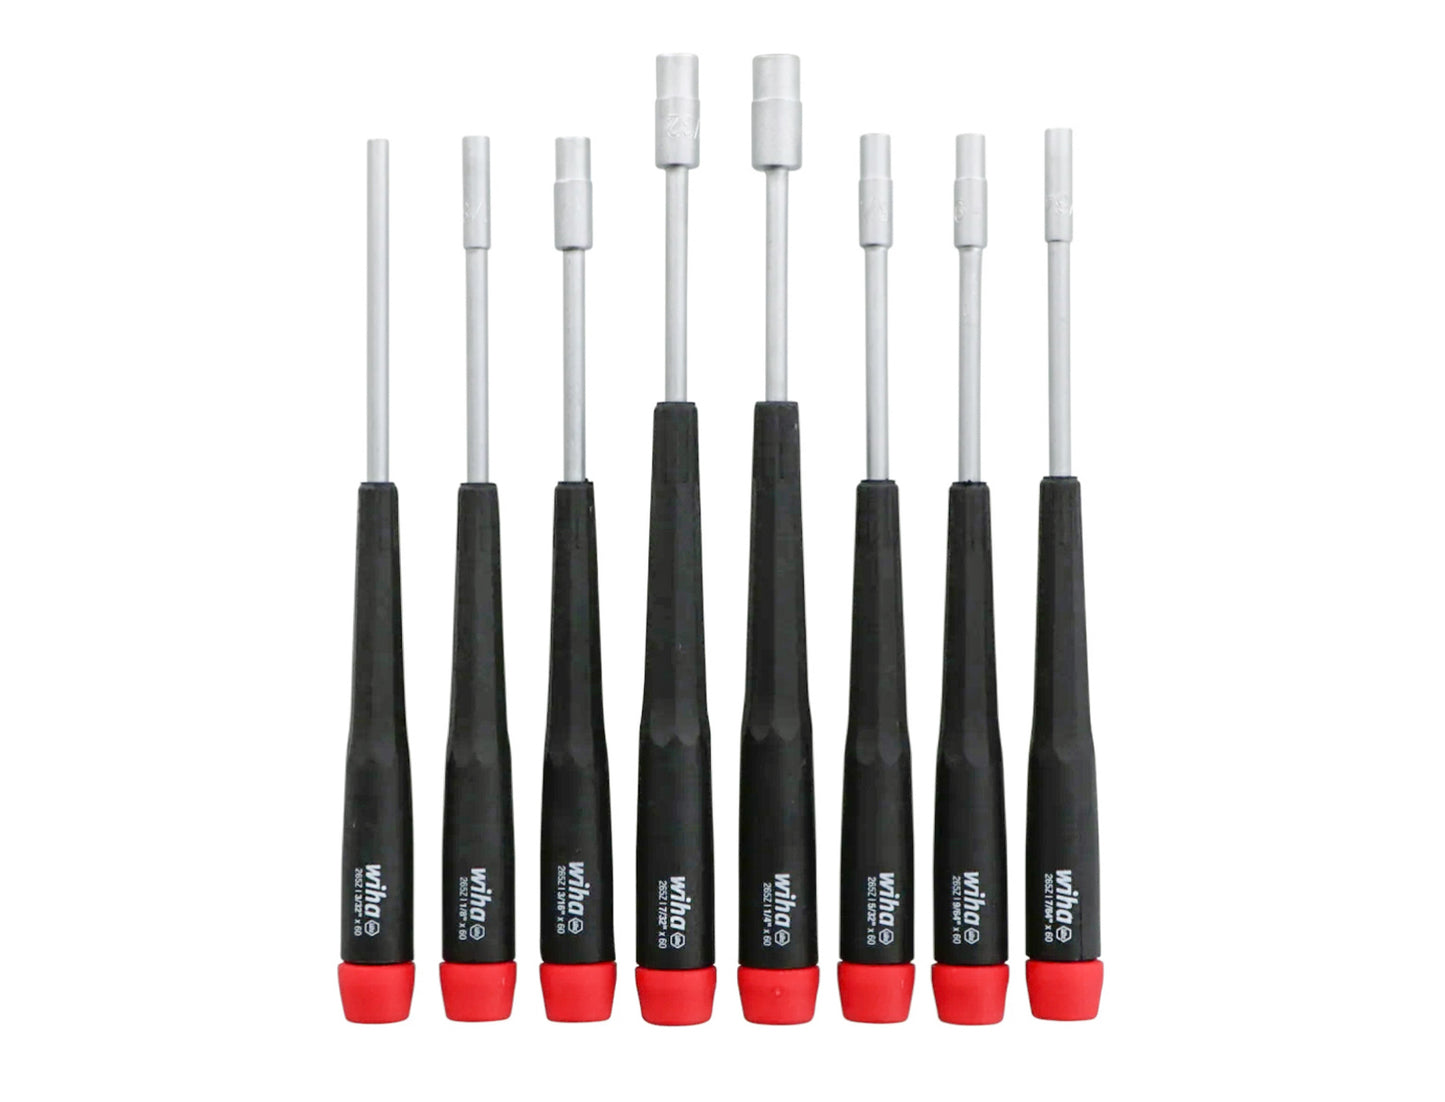 Wiha 7-Piece SAE Nut Driver Set. A high quality Wiha SAE standard precision nut driver set made out of hardened CRM72 tool steel. 3/32", 7/64", 1/8", 9/64", 5/32", 3/16", 7/32", 1/4" sizes. Made in Germany. Wiha Model 26591.